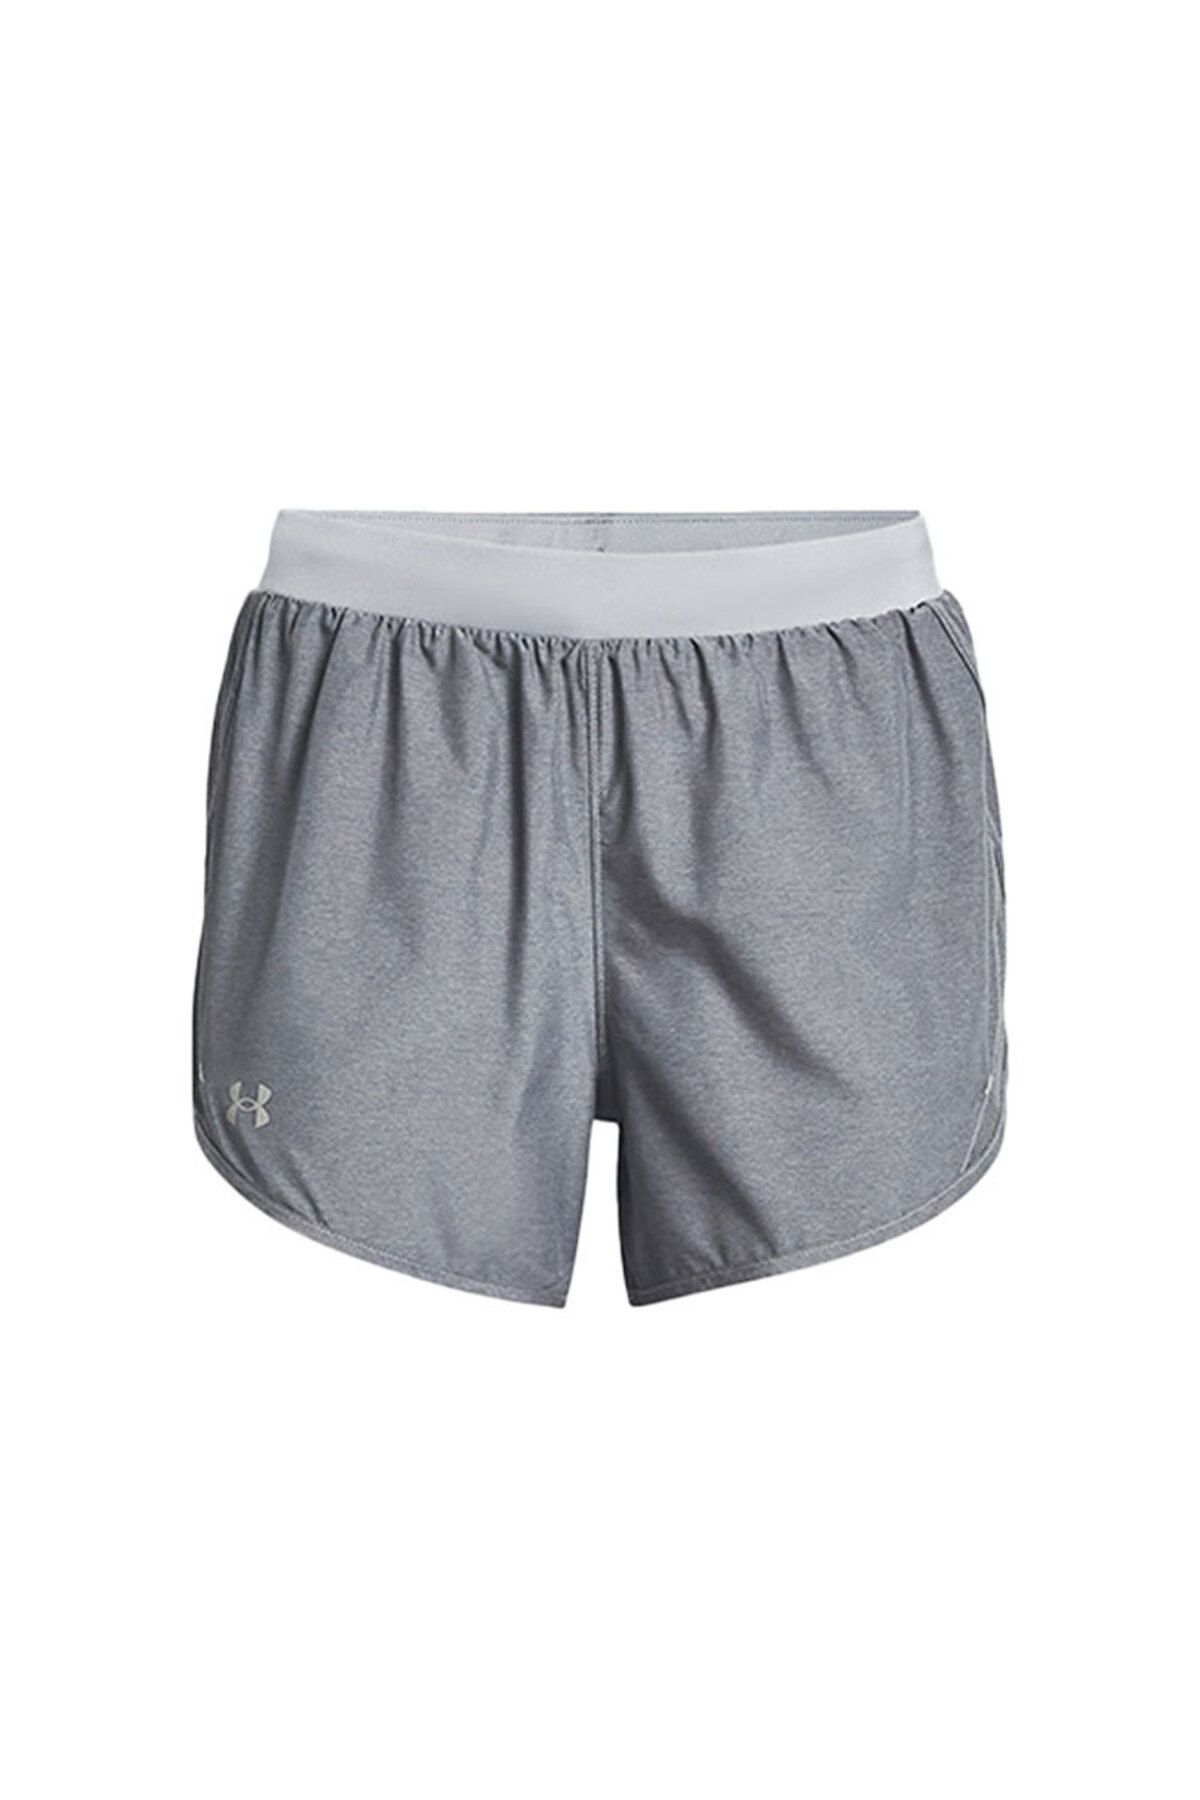 Under Armour W Ua Fly By 2.0 Short